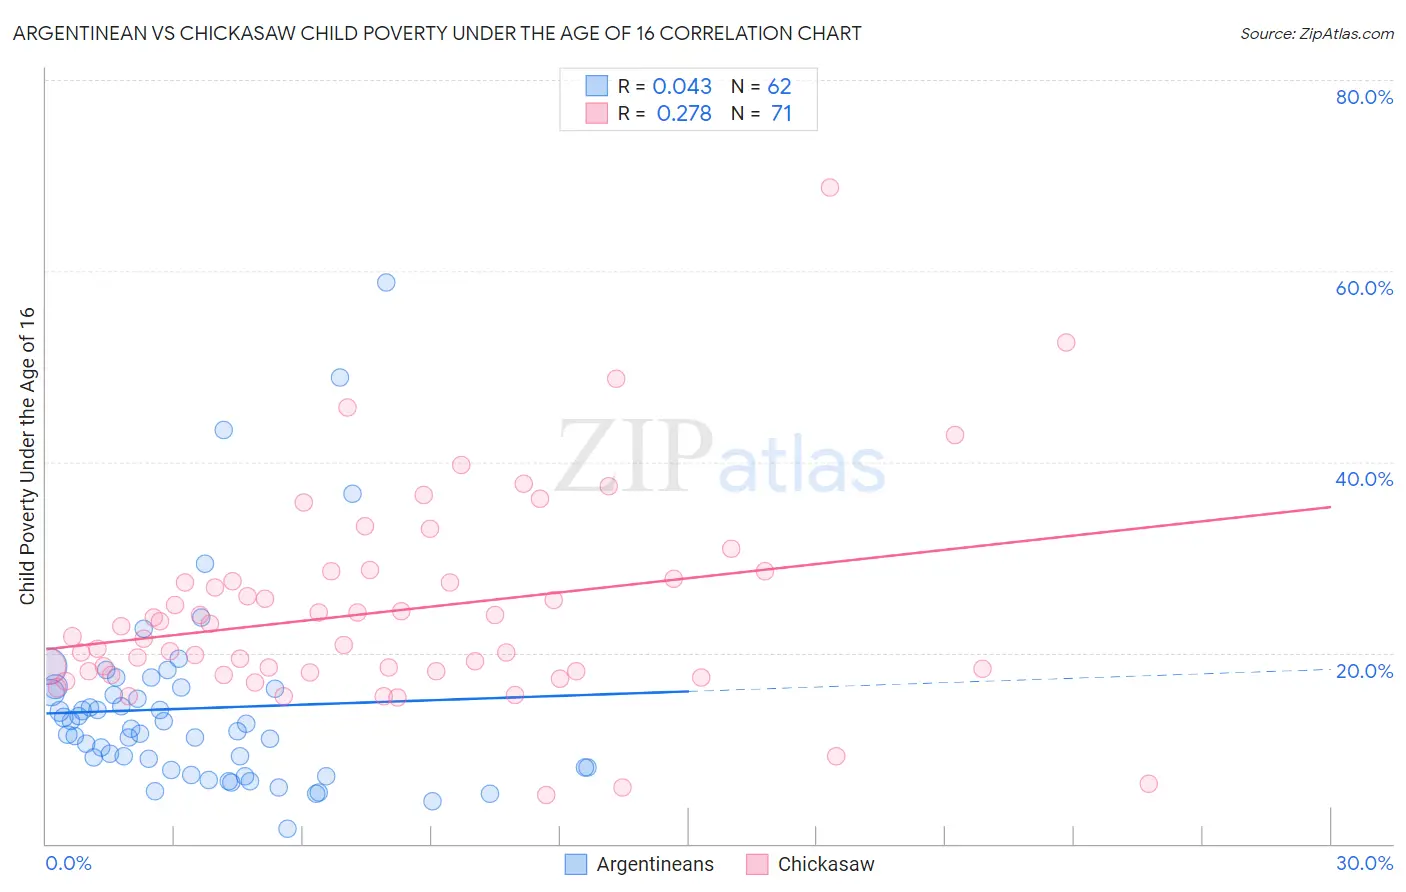 Argentinean vs Chickasaw Child Poverty Under the Age of 16